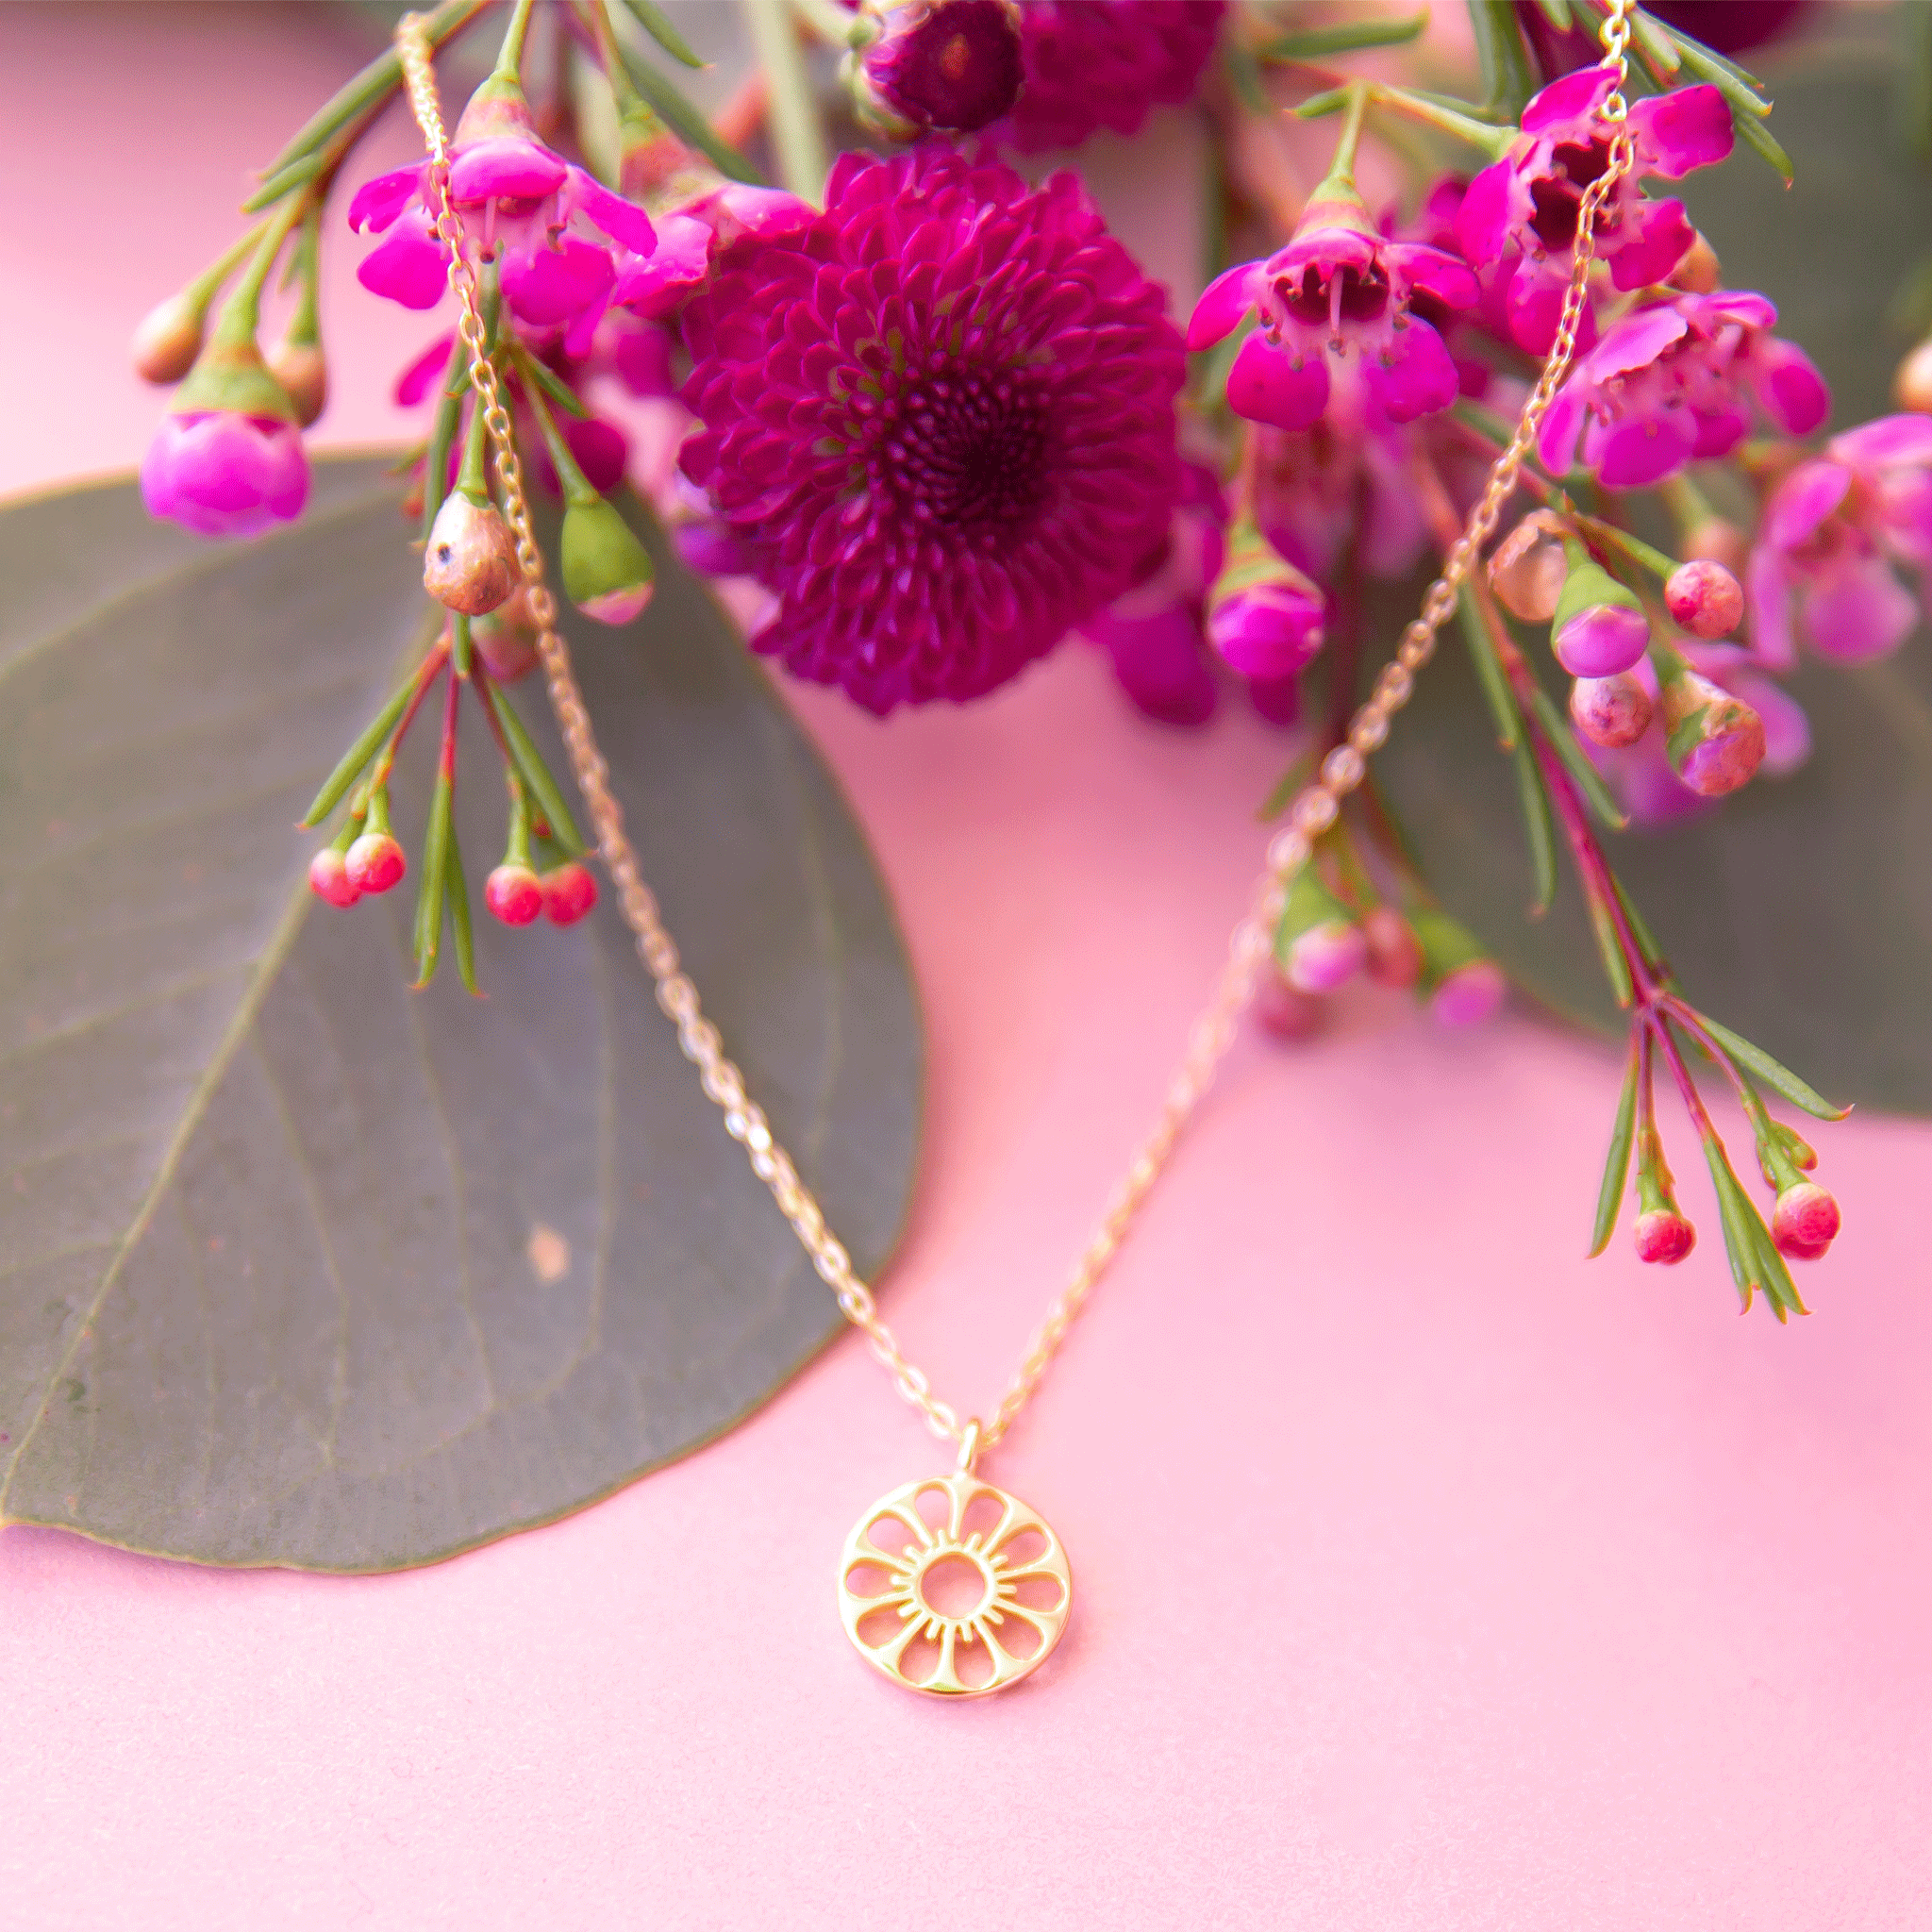 A dainty gold chain necklace with a gold circle pendant in the center with a cut out of a daisy flower, photographed next to pink dried florals.